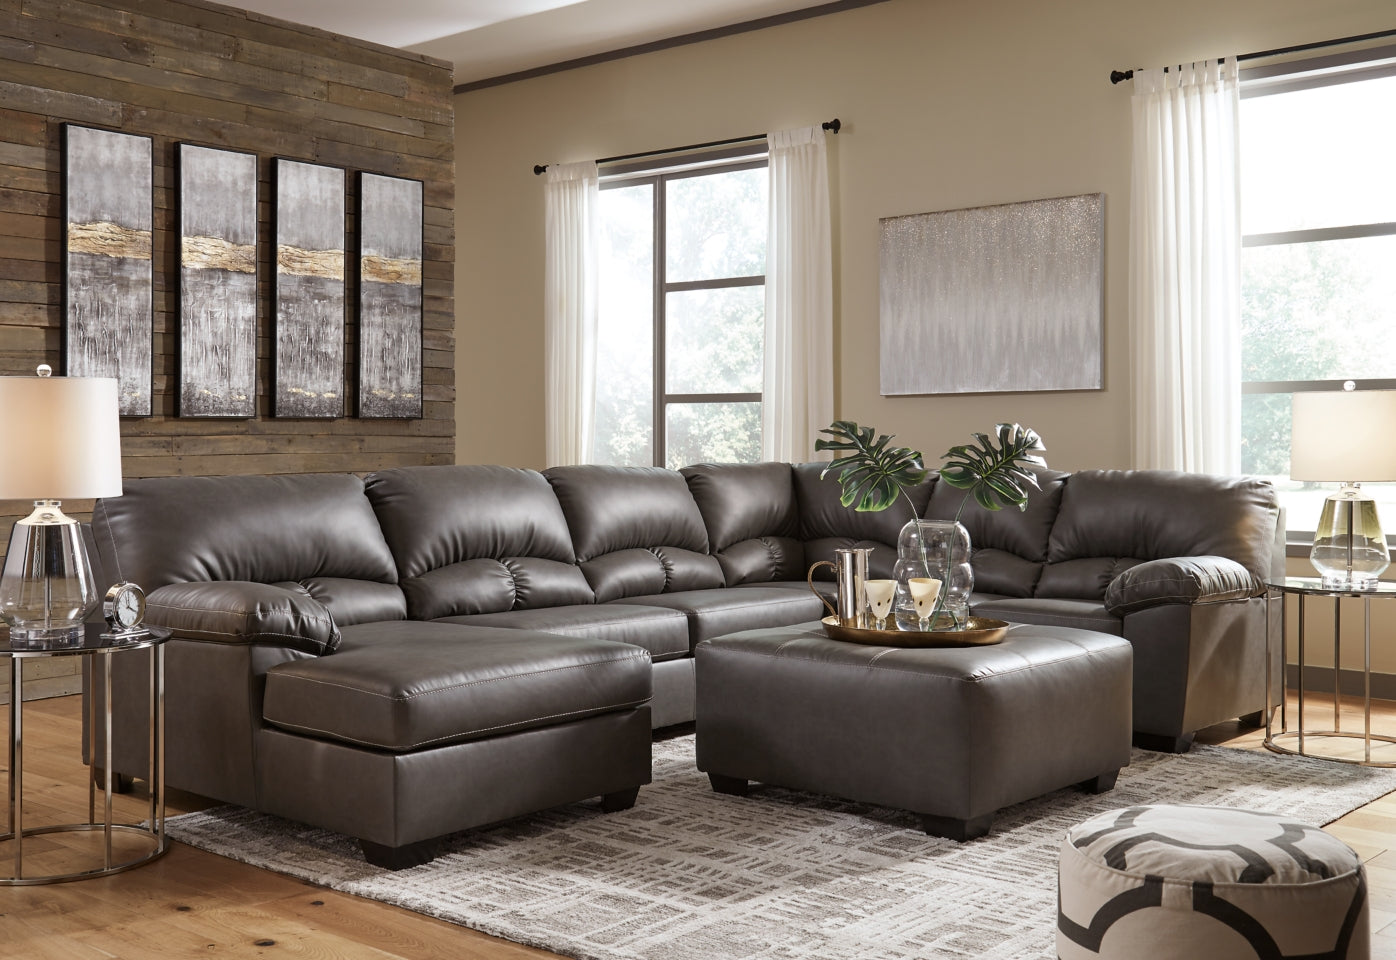 Aberton 3-Piece Sectional with Ottoman - PKG007283 - furniture place usa